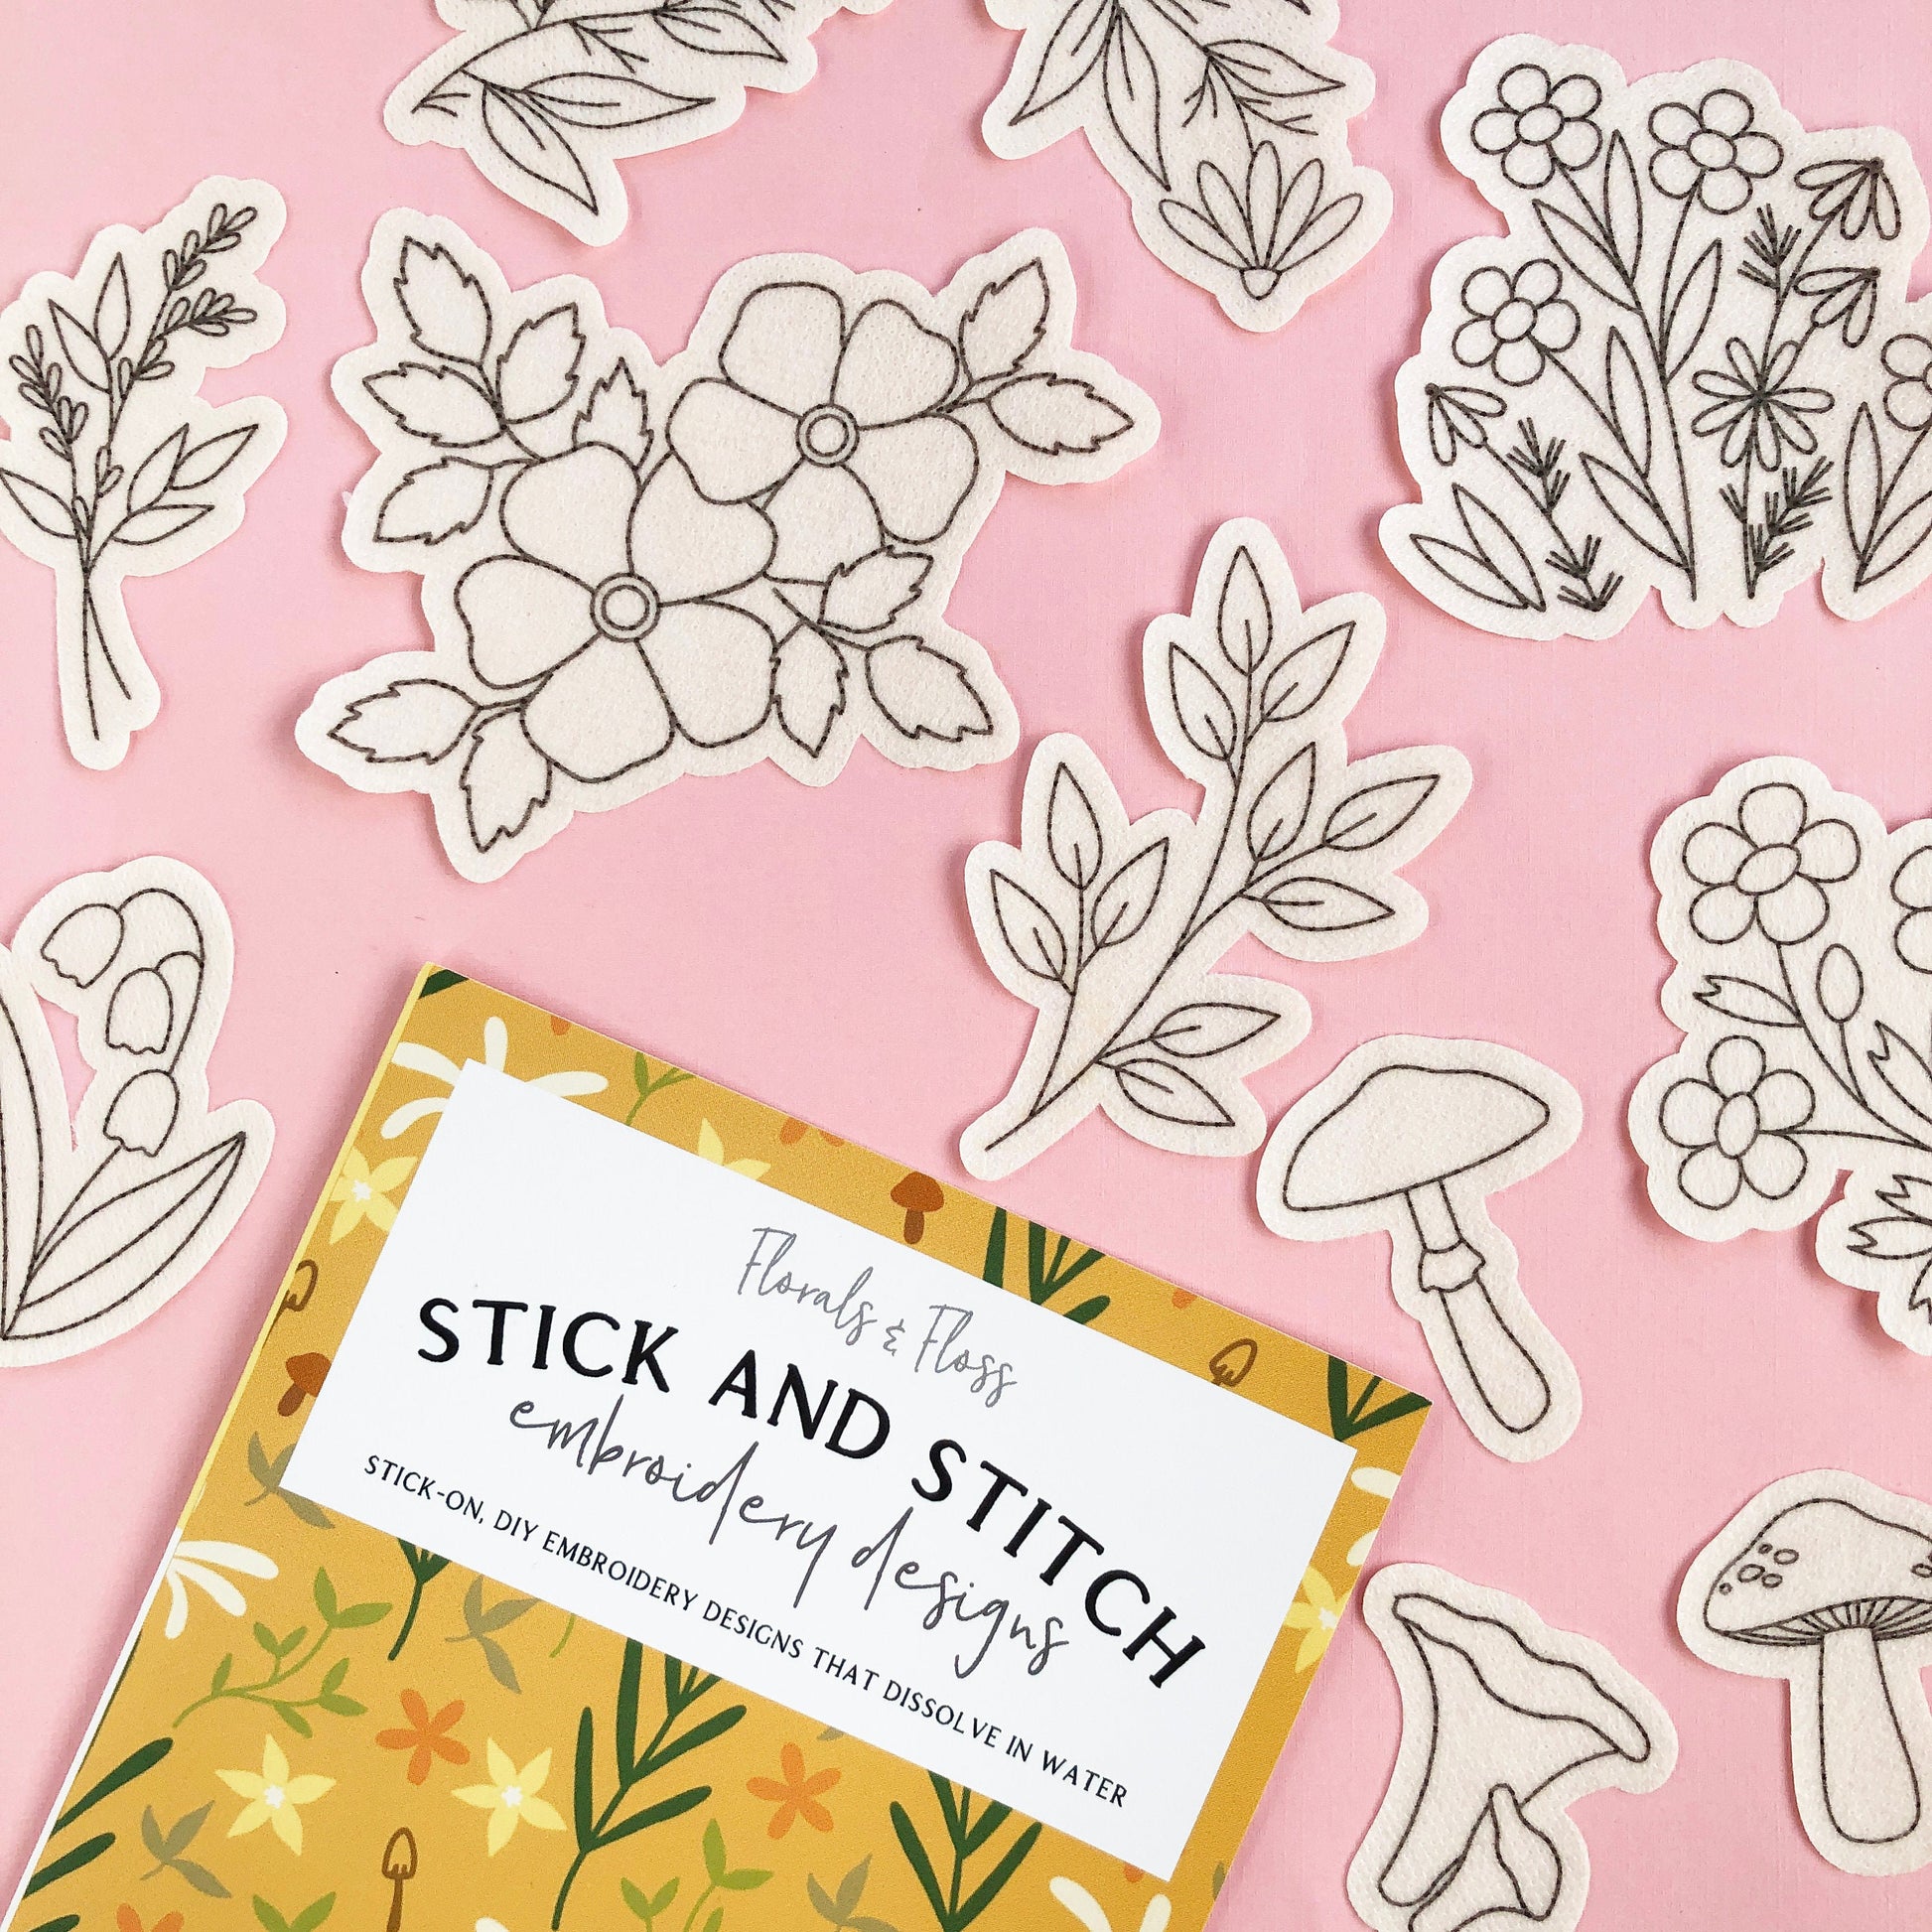 Tropical Stick & Stitch Embroidery Stickers/patches, Printed Embroidery  Patterns, Water Soluble Stick and Stitch Designs -  Finland